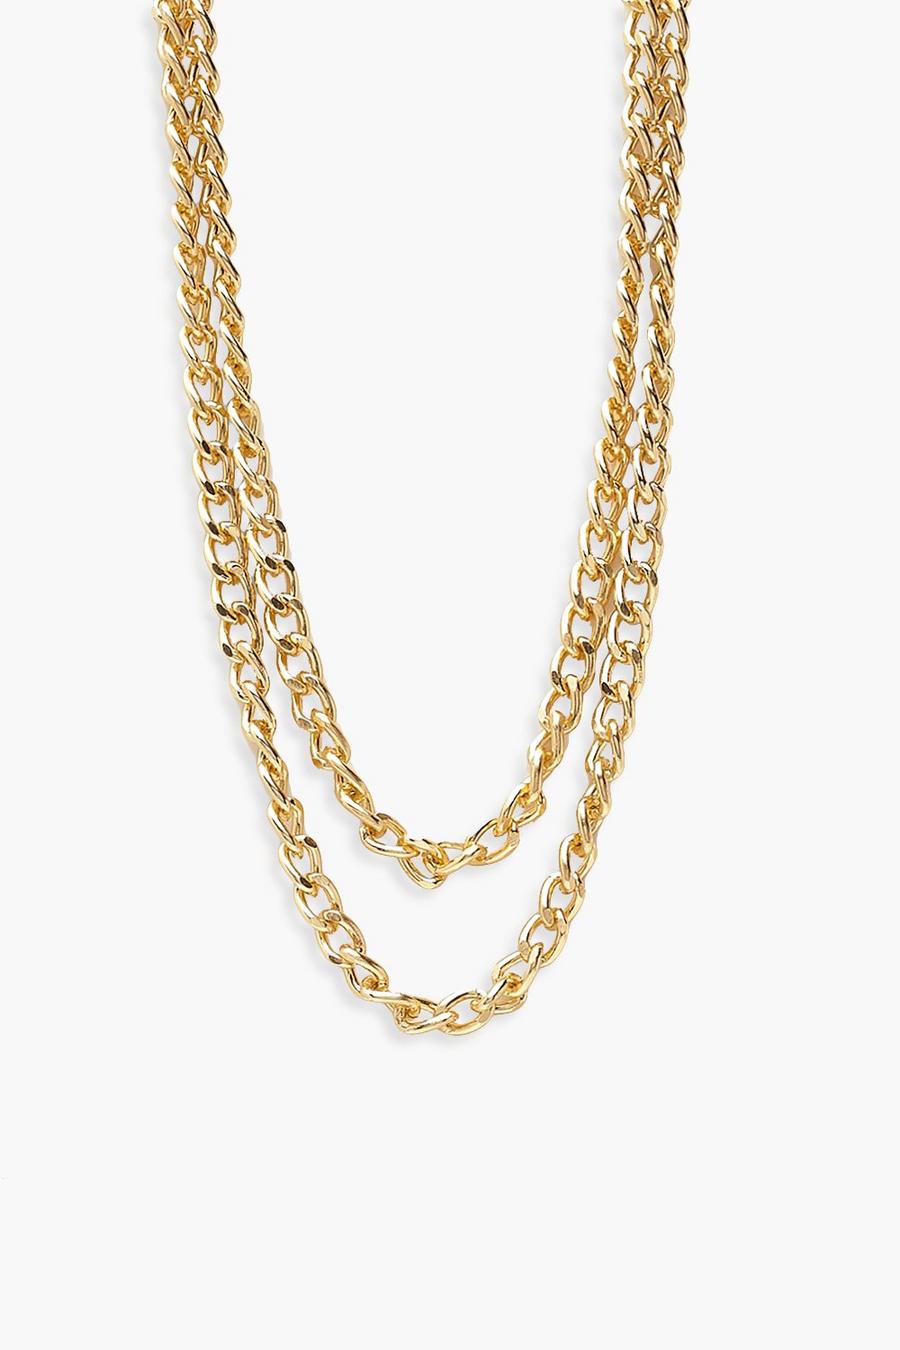 Gold metallic Layered Chain Necklace